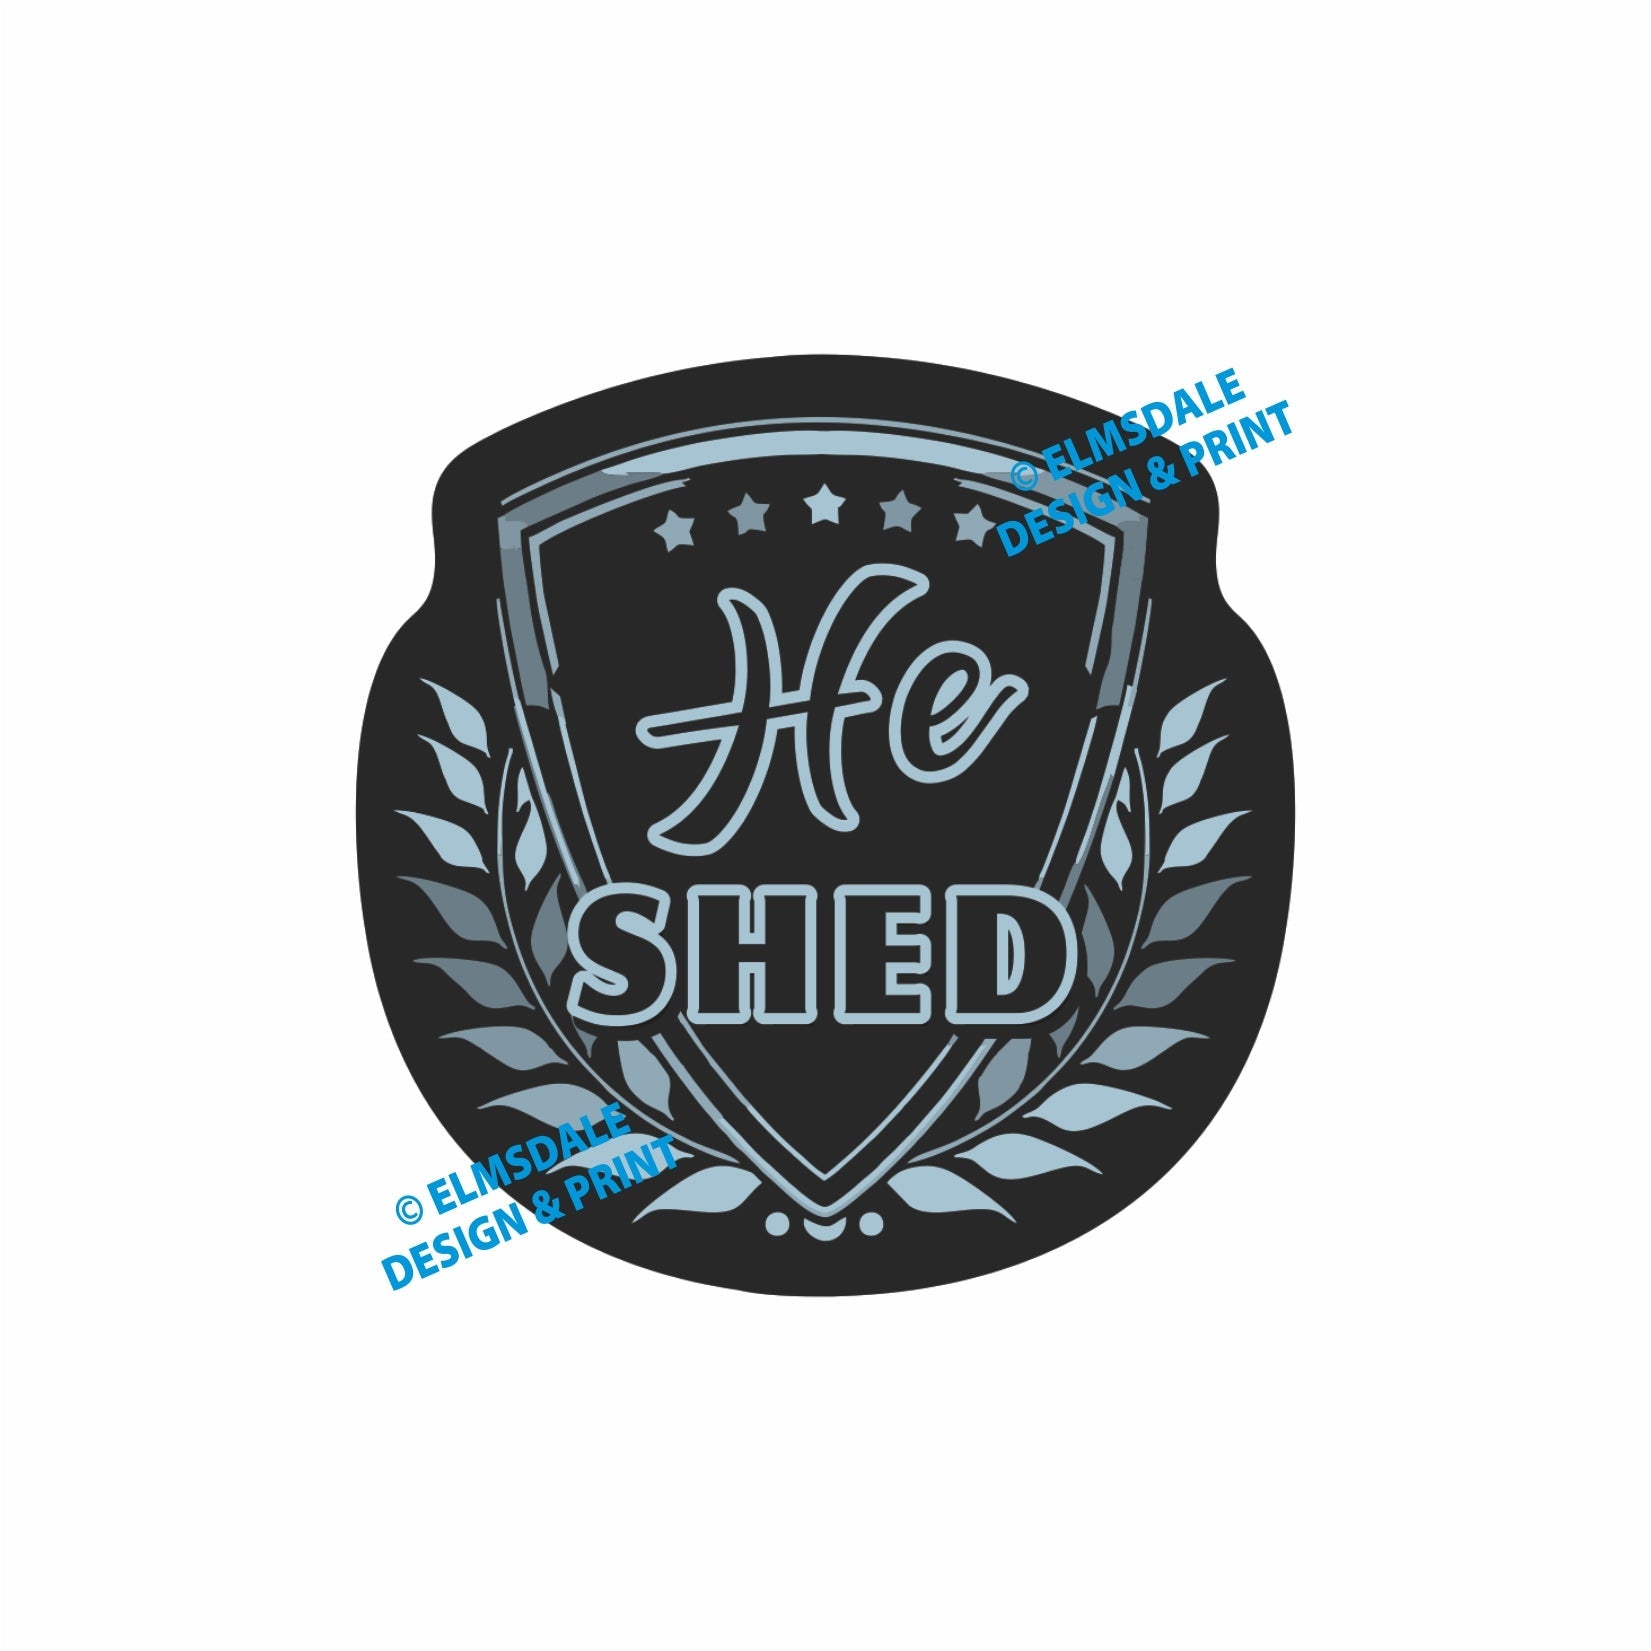 He Shed - Decal / 7.75’ x 7.75’ / Silver & Black